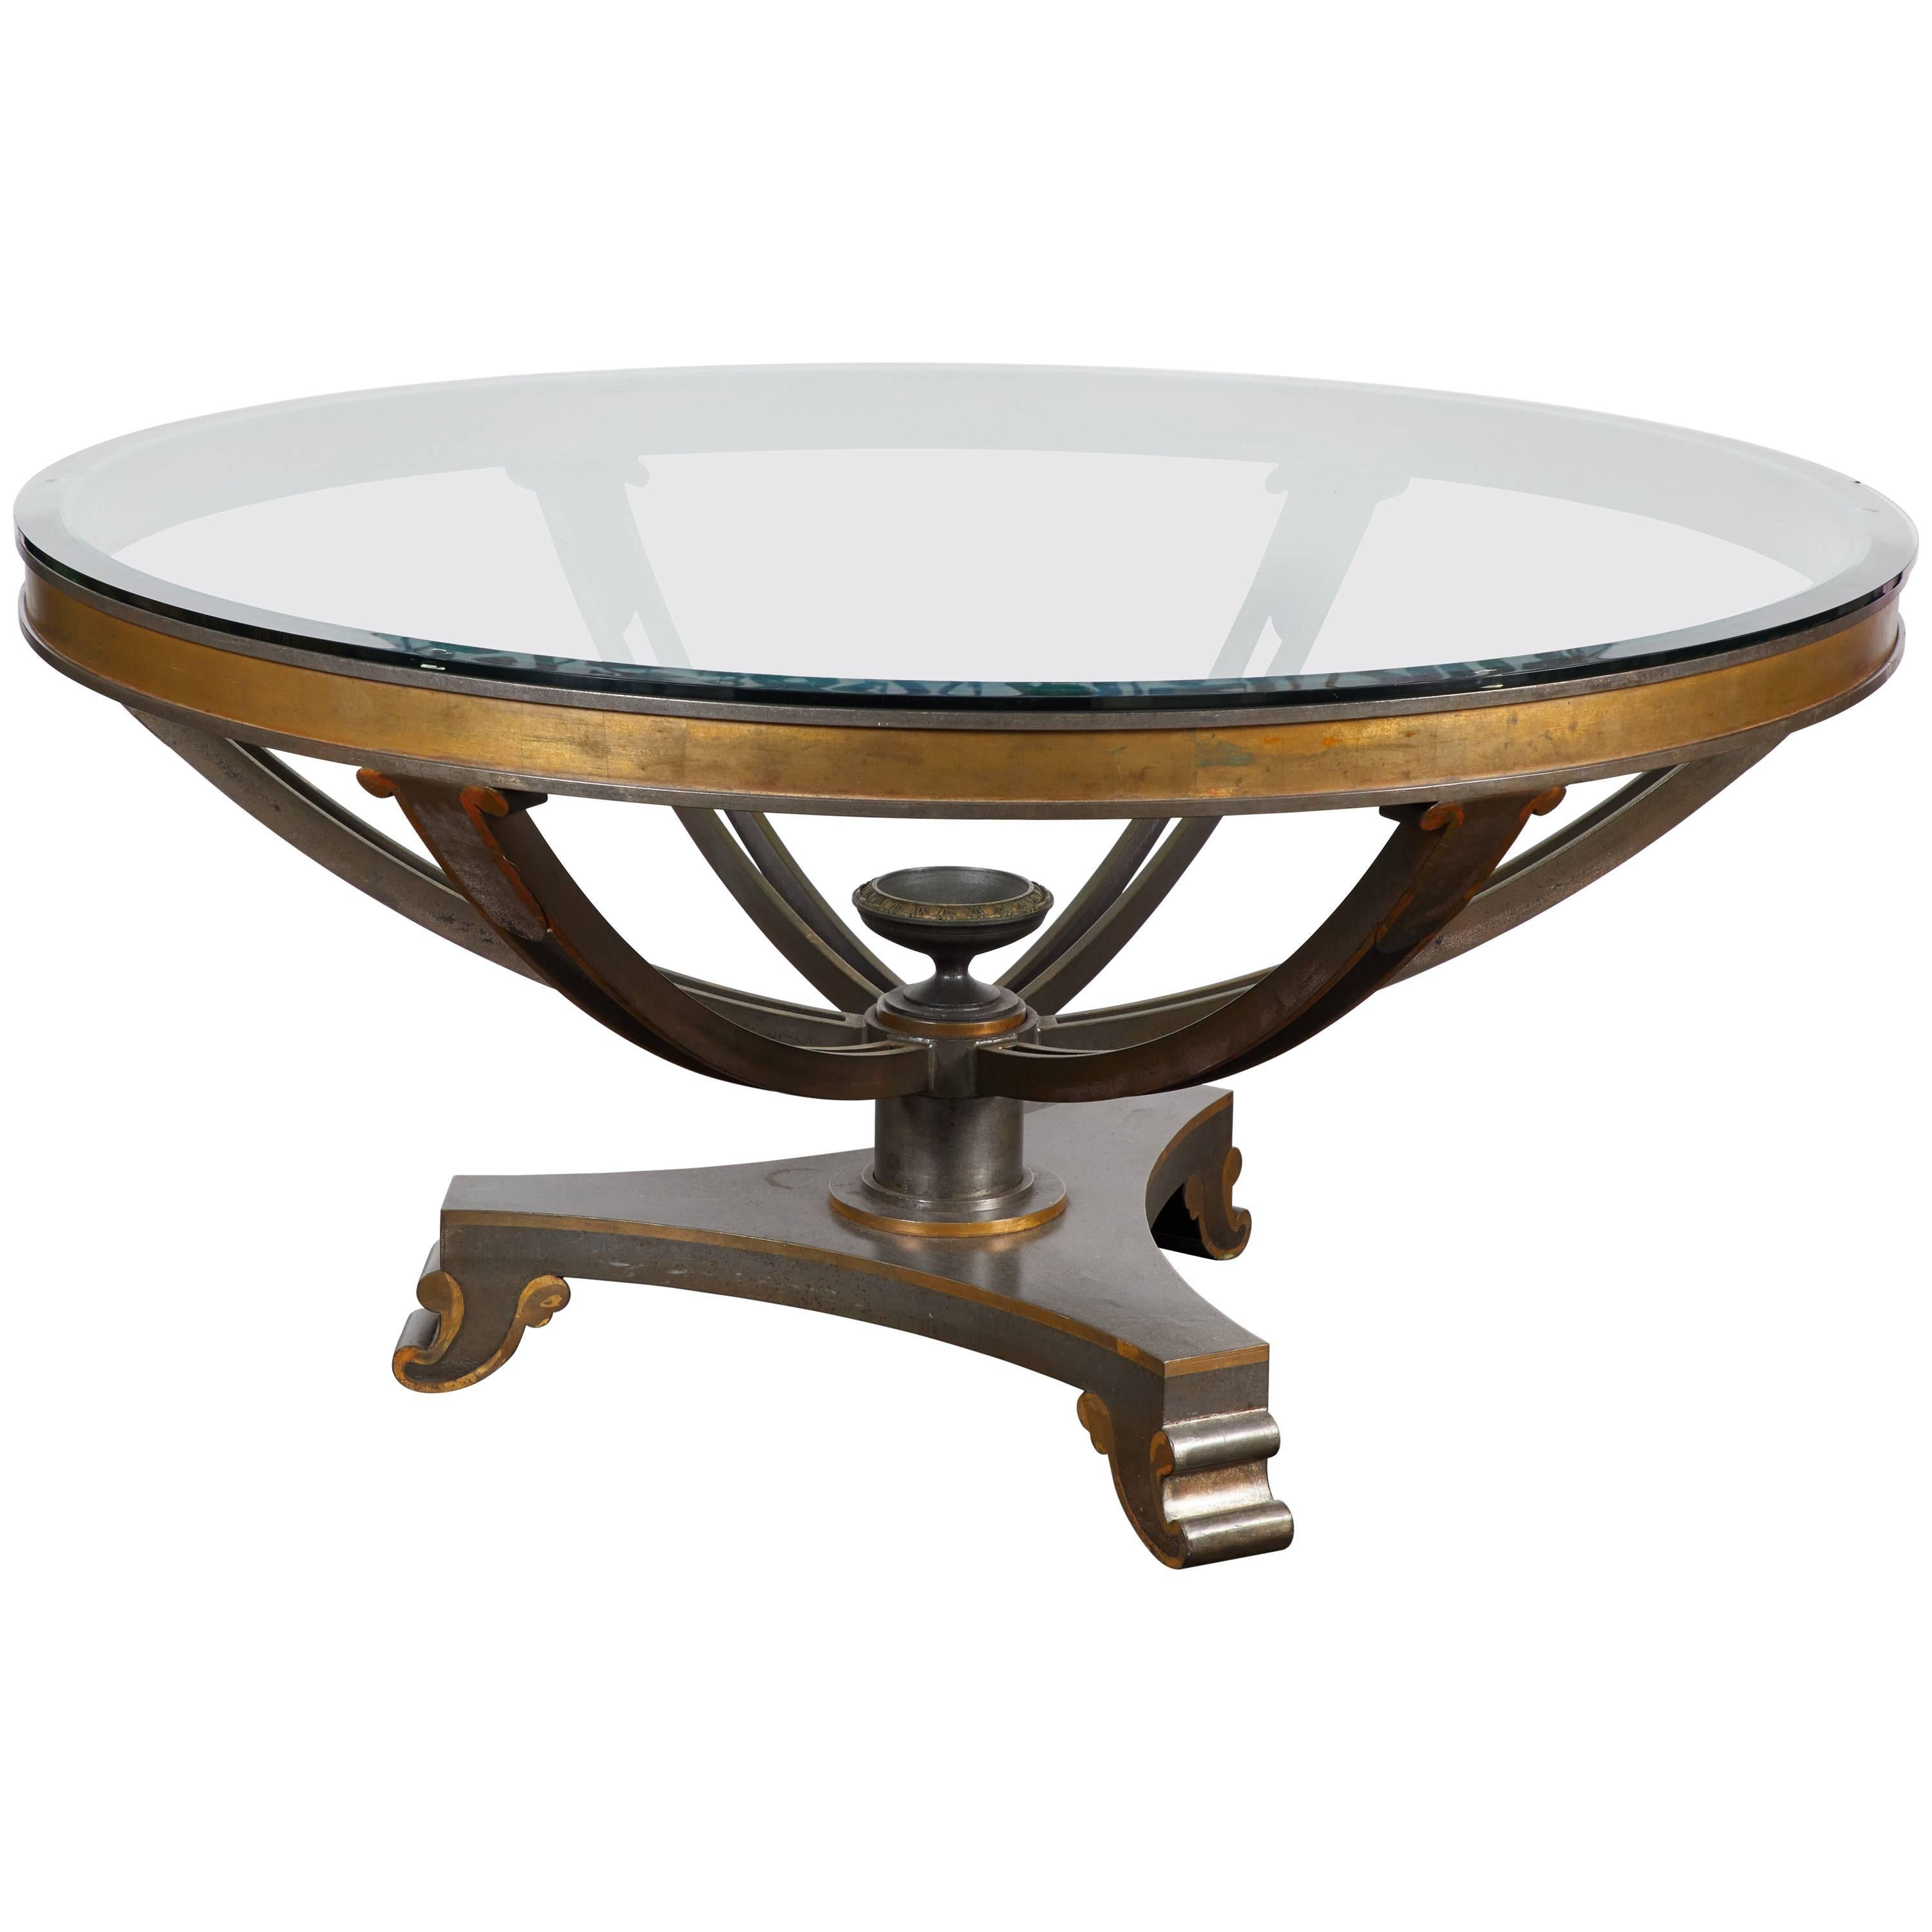 Mid-20th Century Neoclassical Style Bronze Table with Glass Top